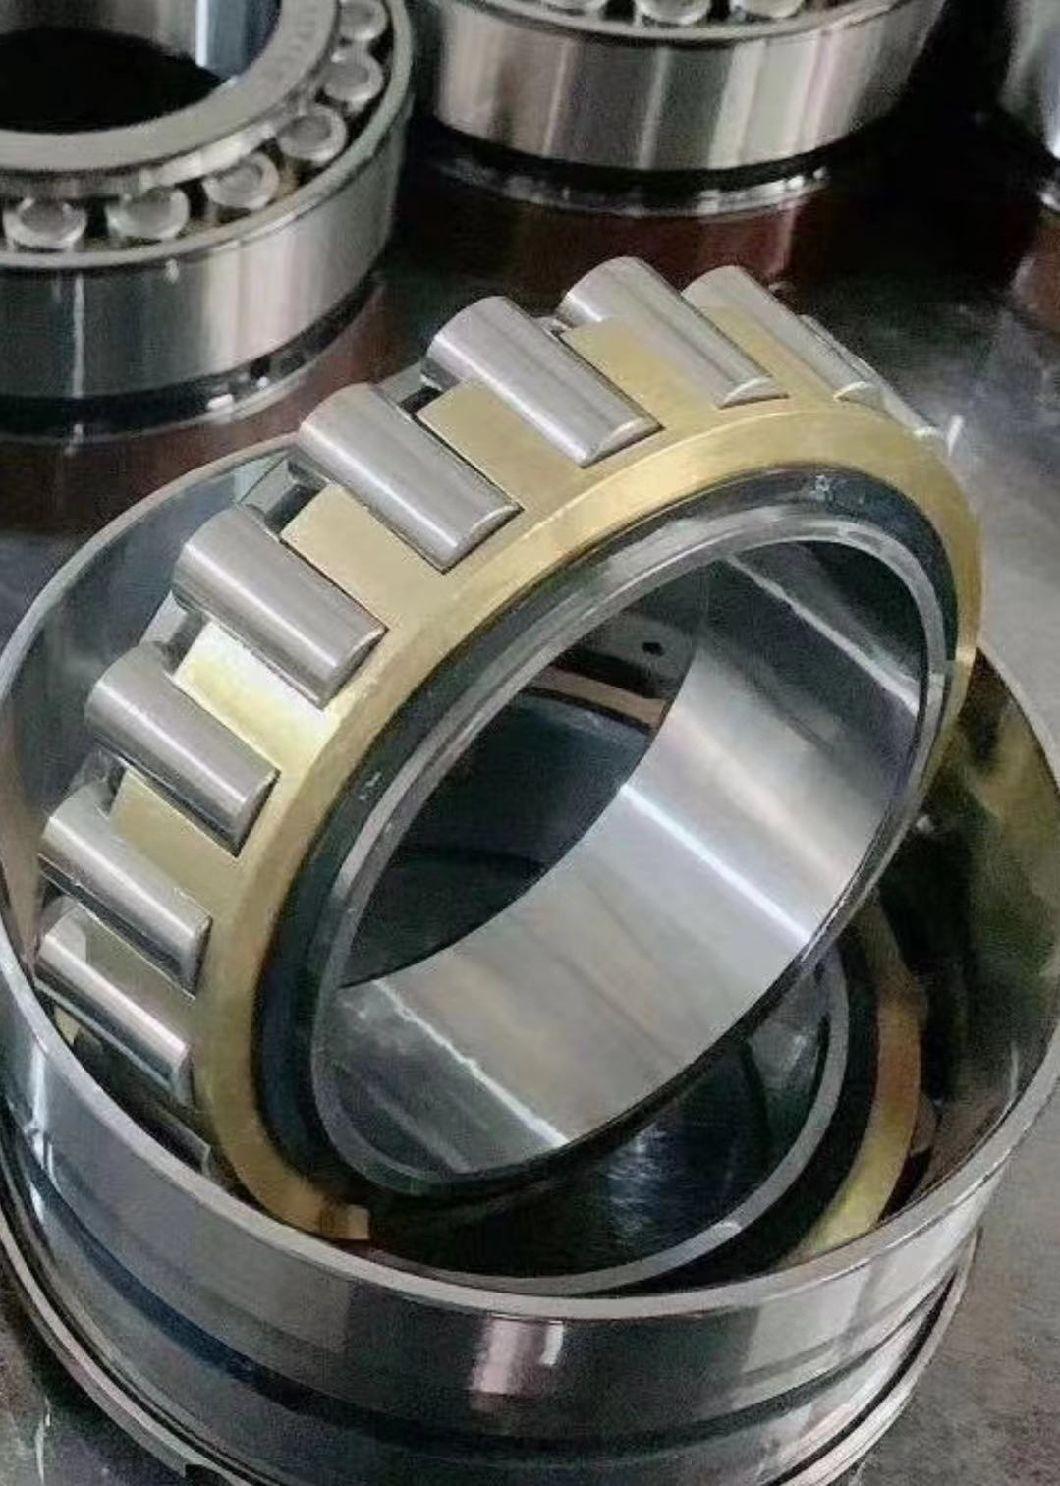 Tapered Roller Bearing 30218